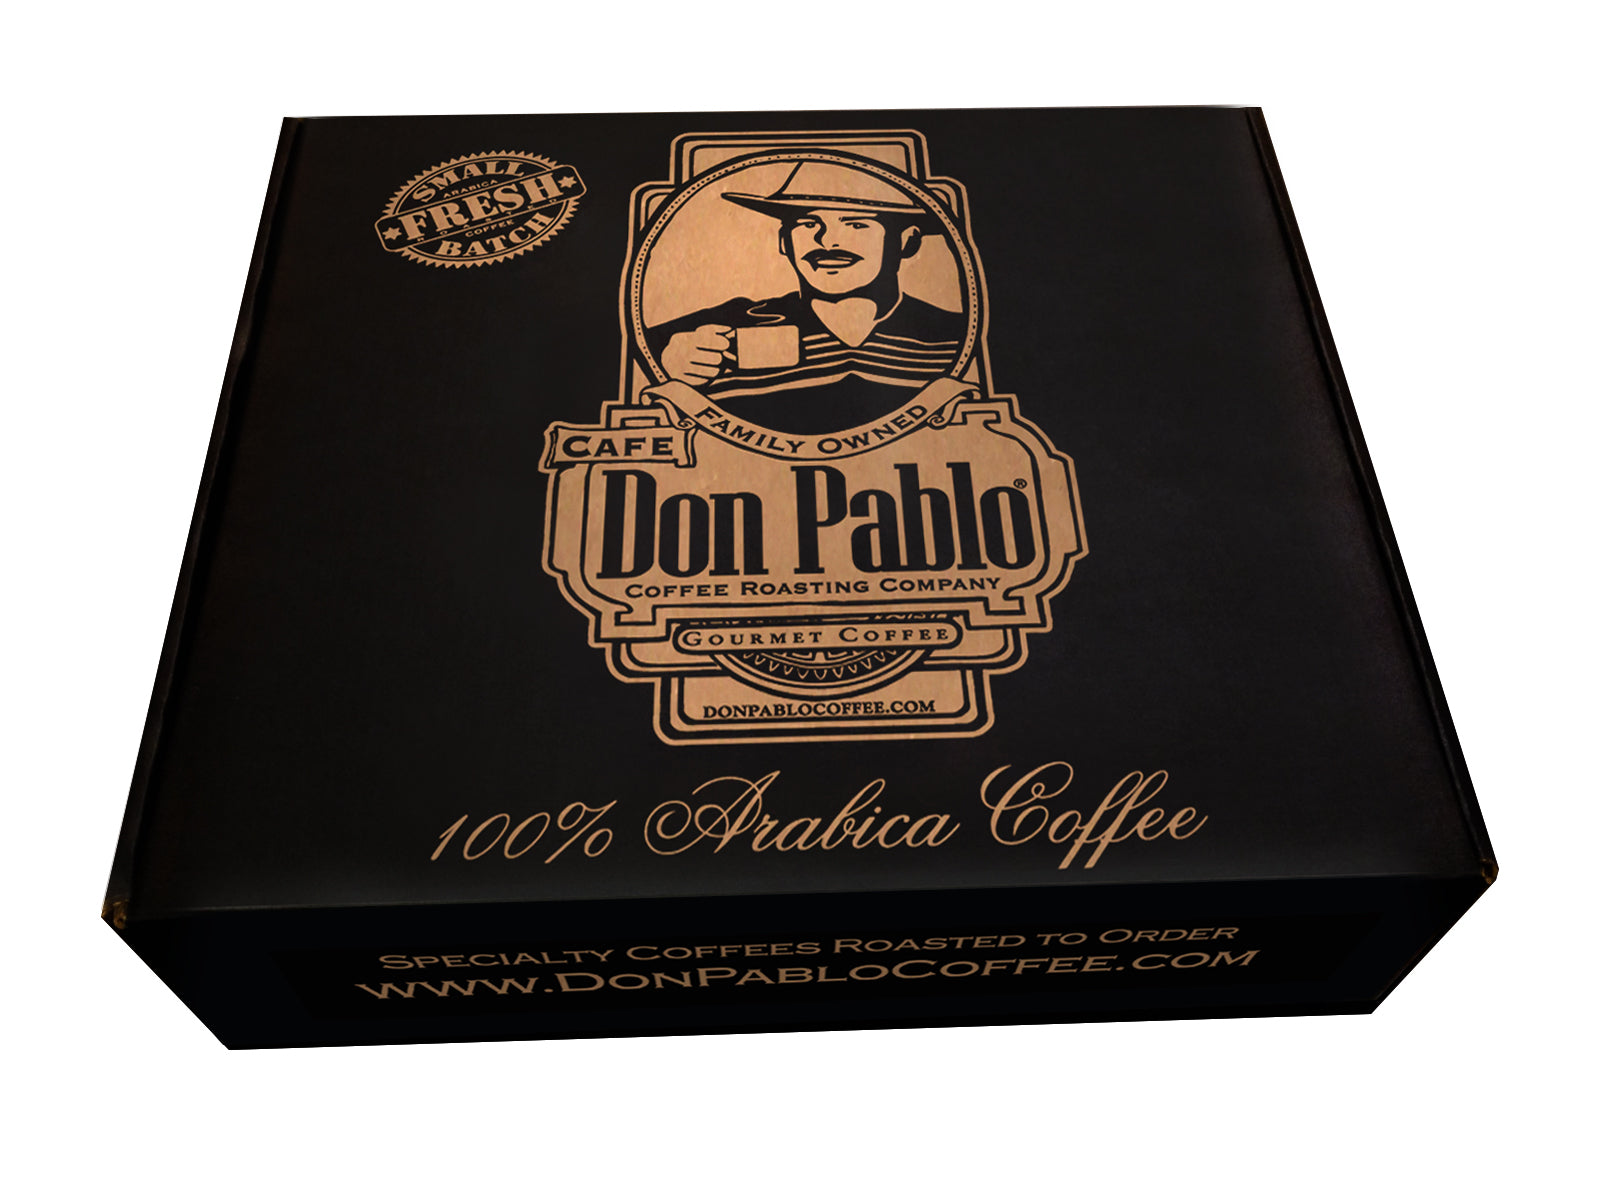 Don Pablo Coffee: The Perfect Blend for Coffee Lovers